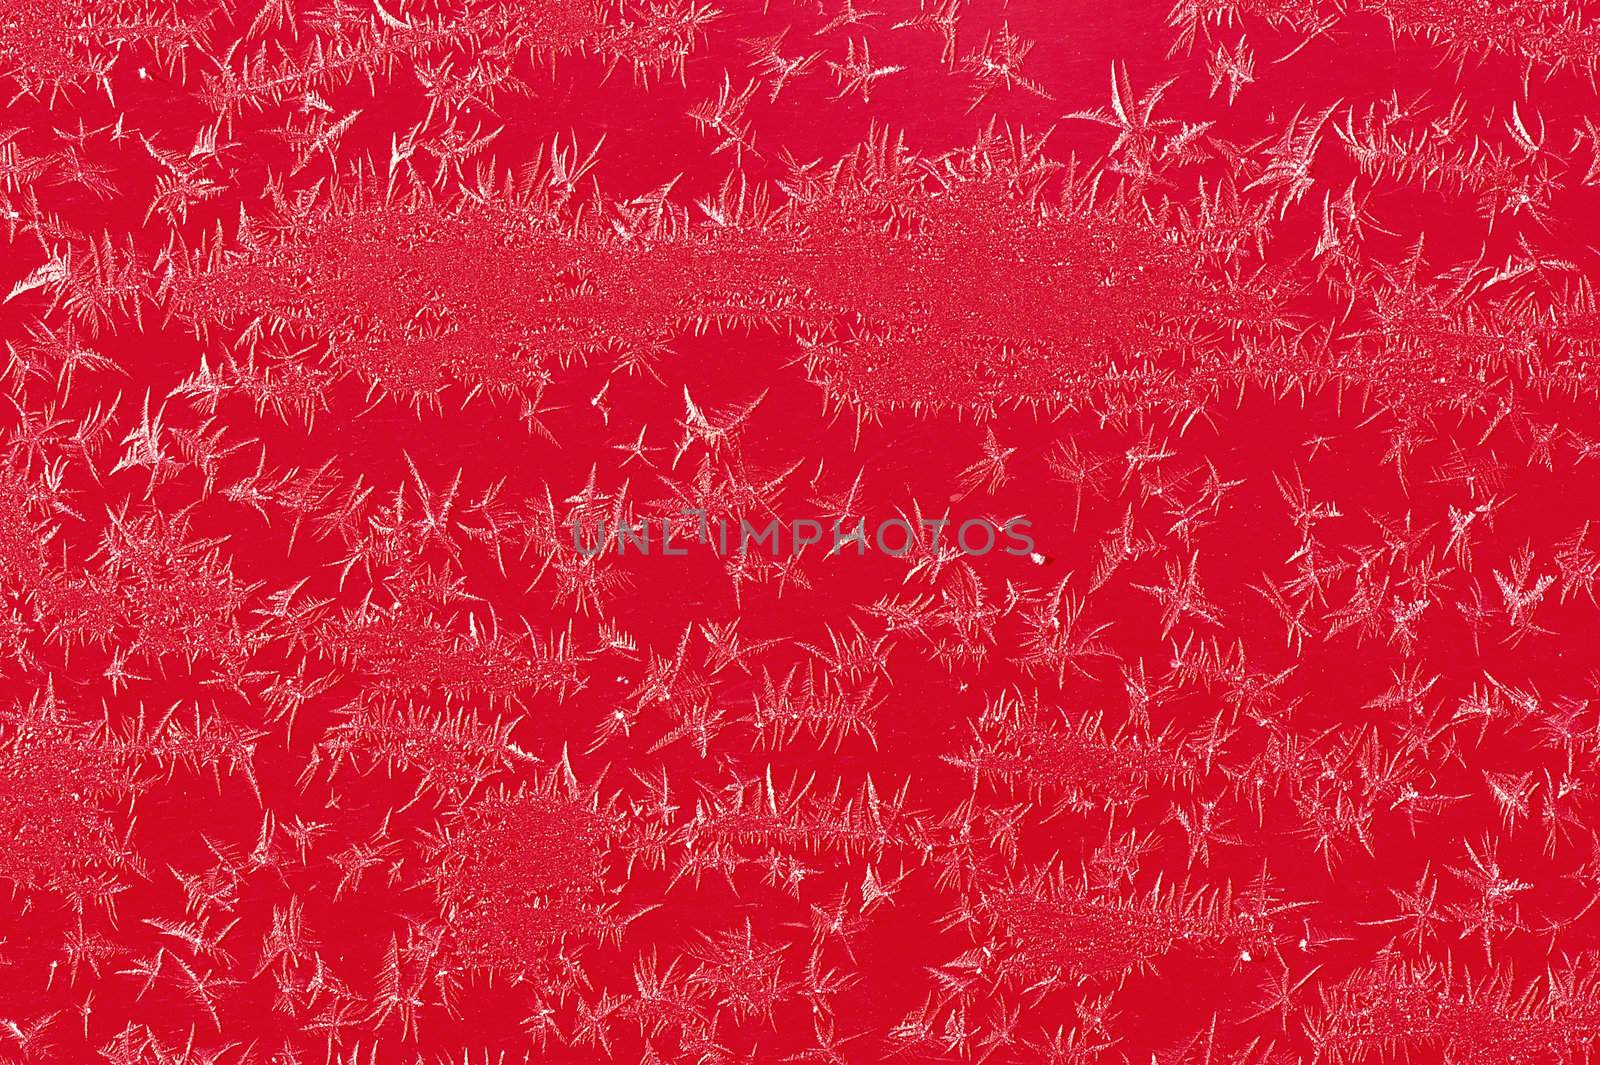 Frost Iceflower  on a red surface of car